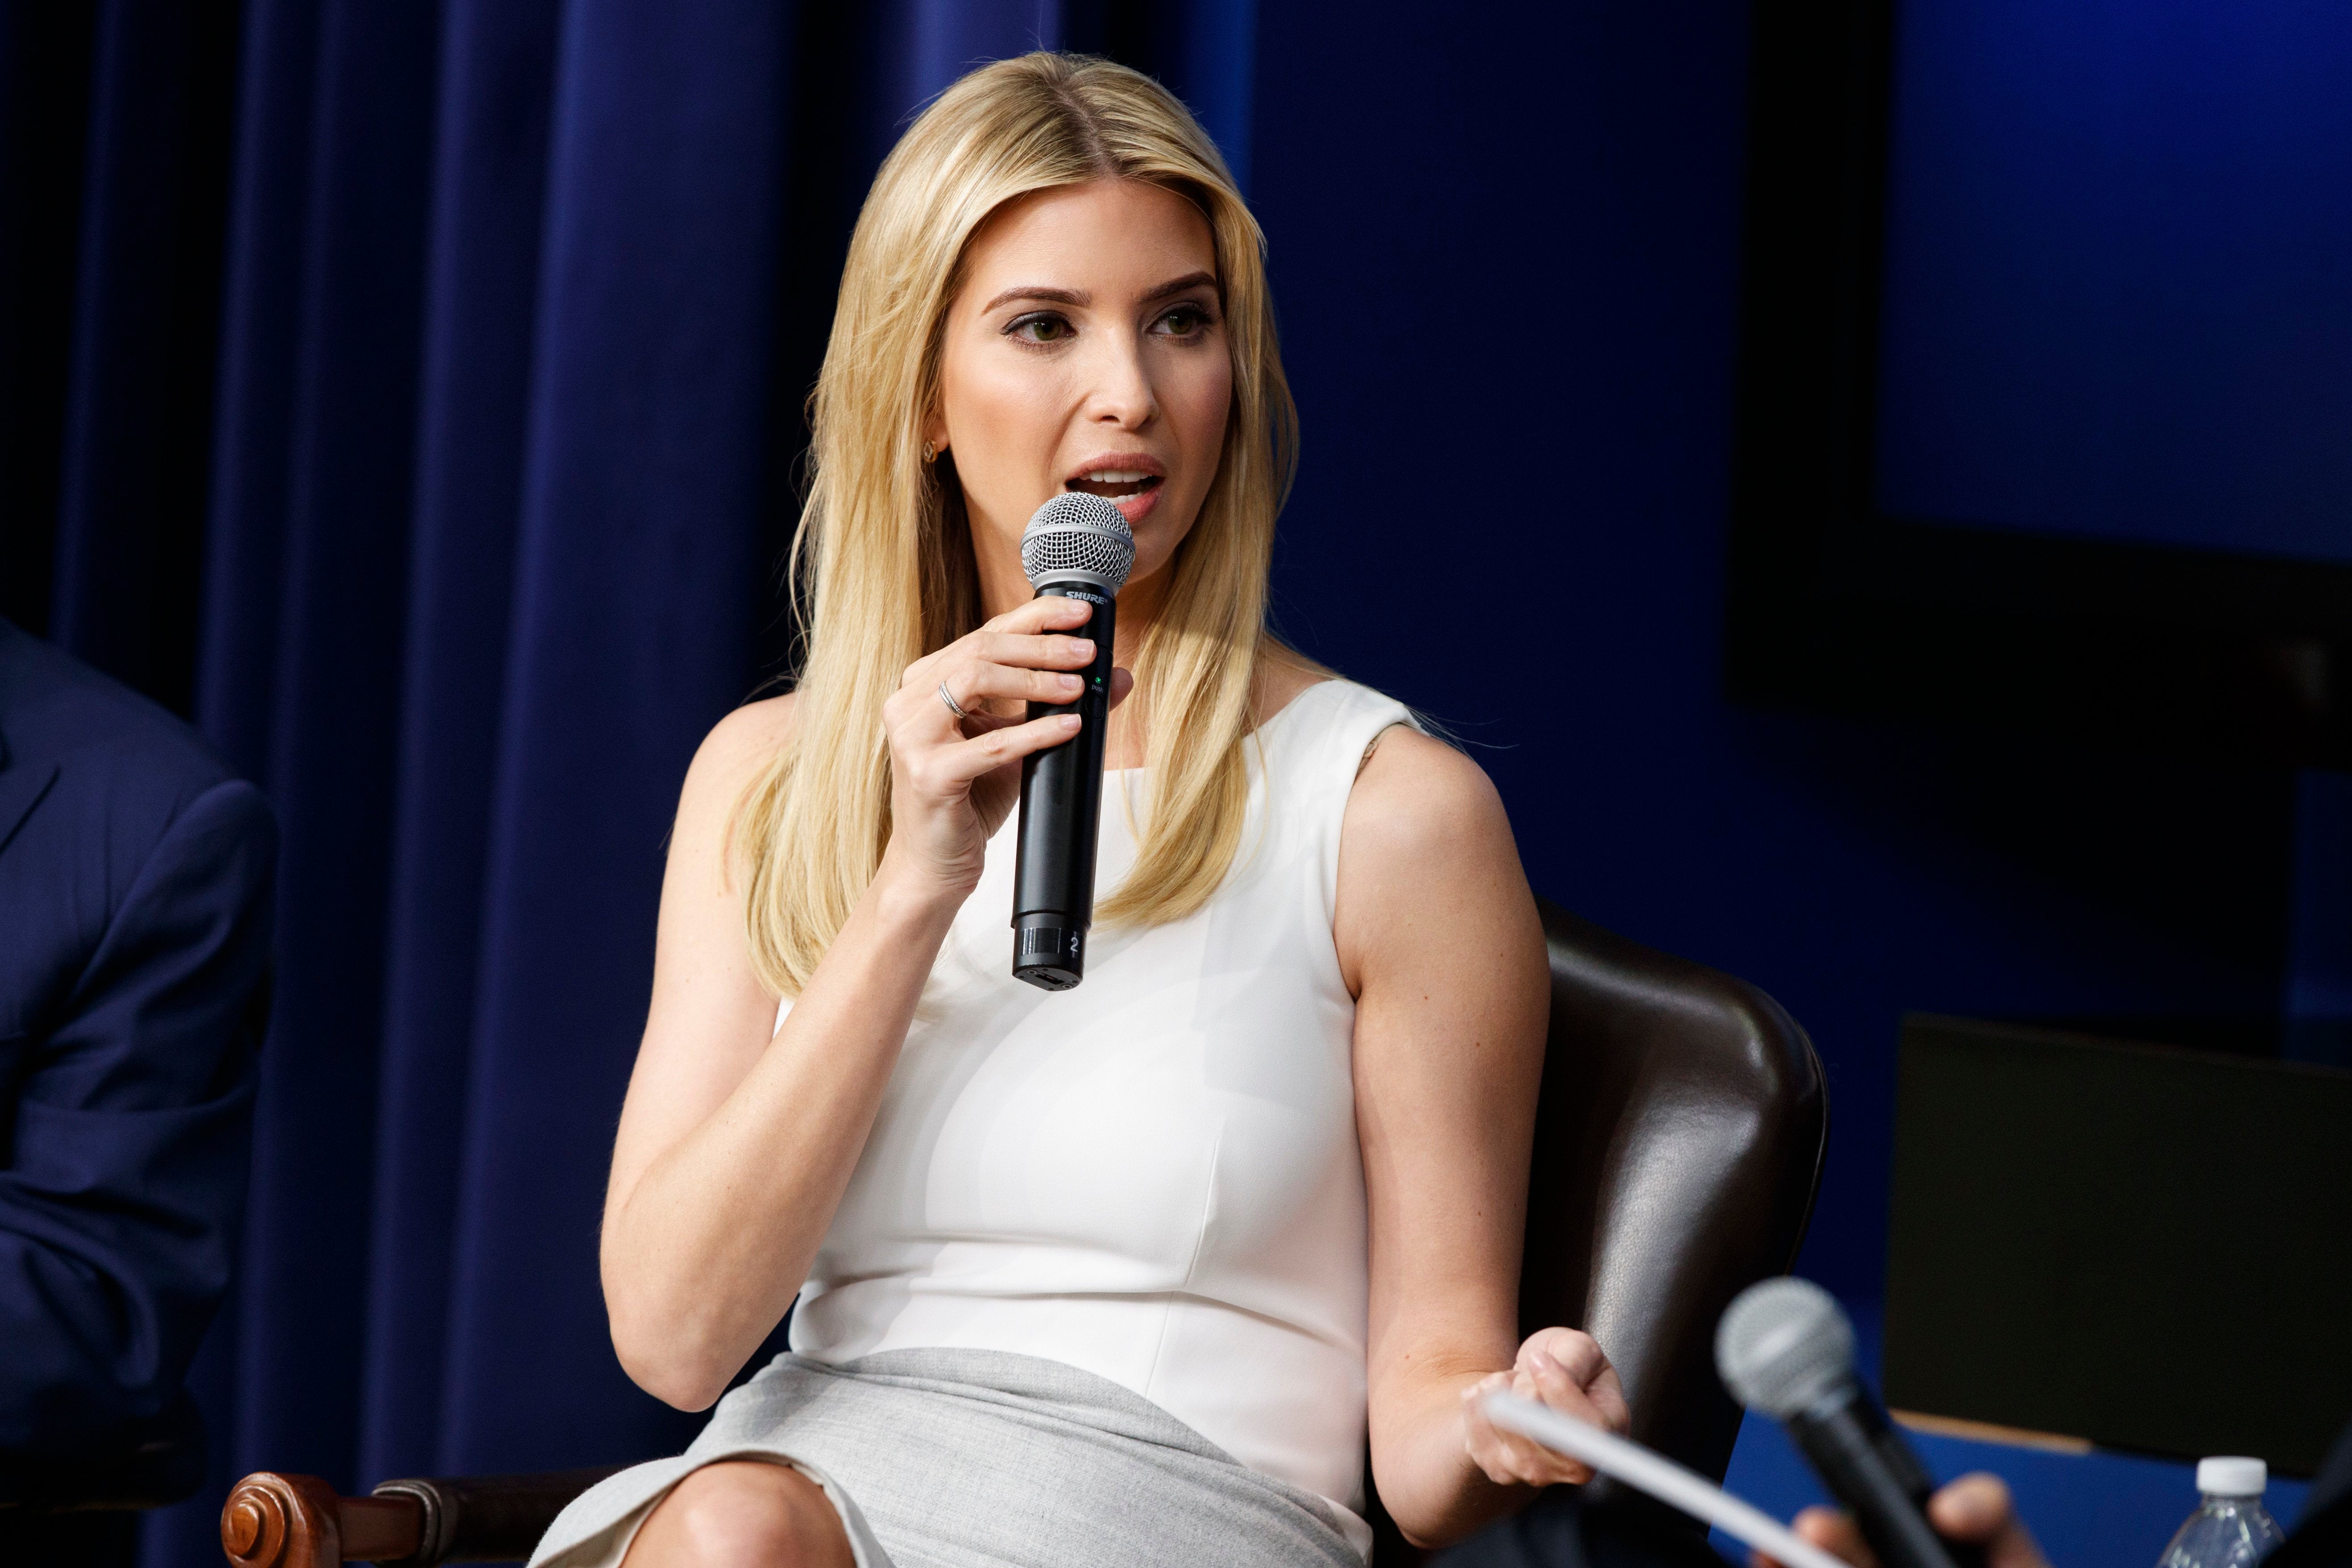 West Wing Dweller And Presidential Advisor Ivanka Trump: 'I Try To Stay Out Of Politics’
